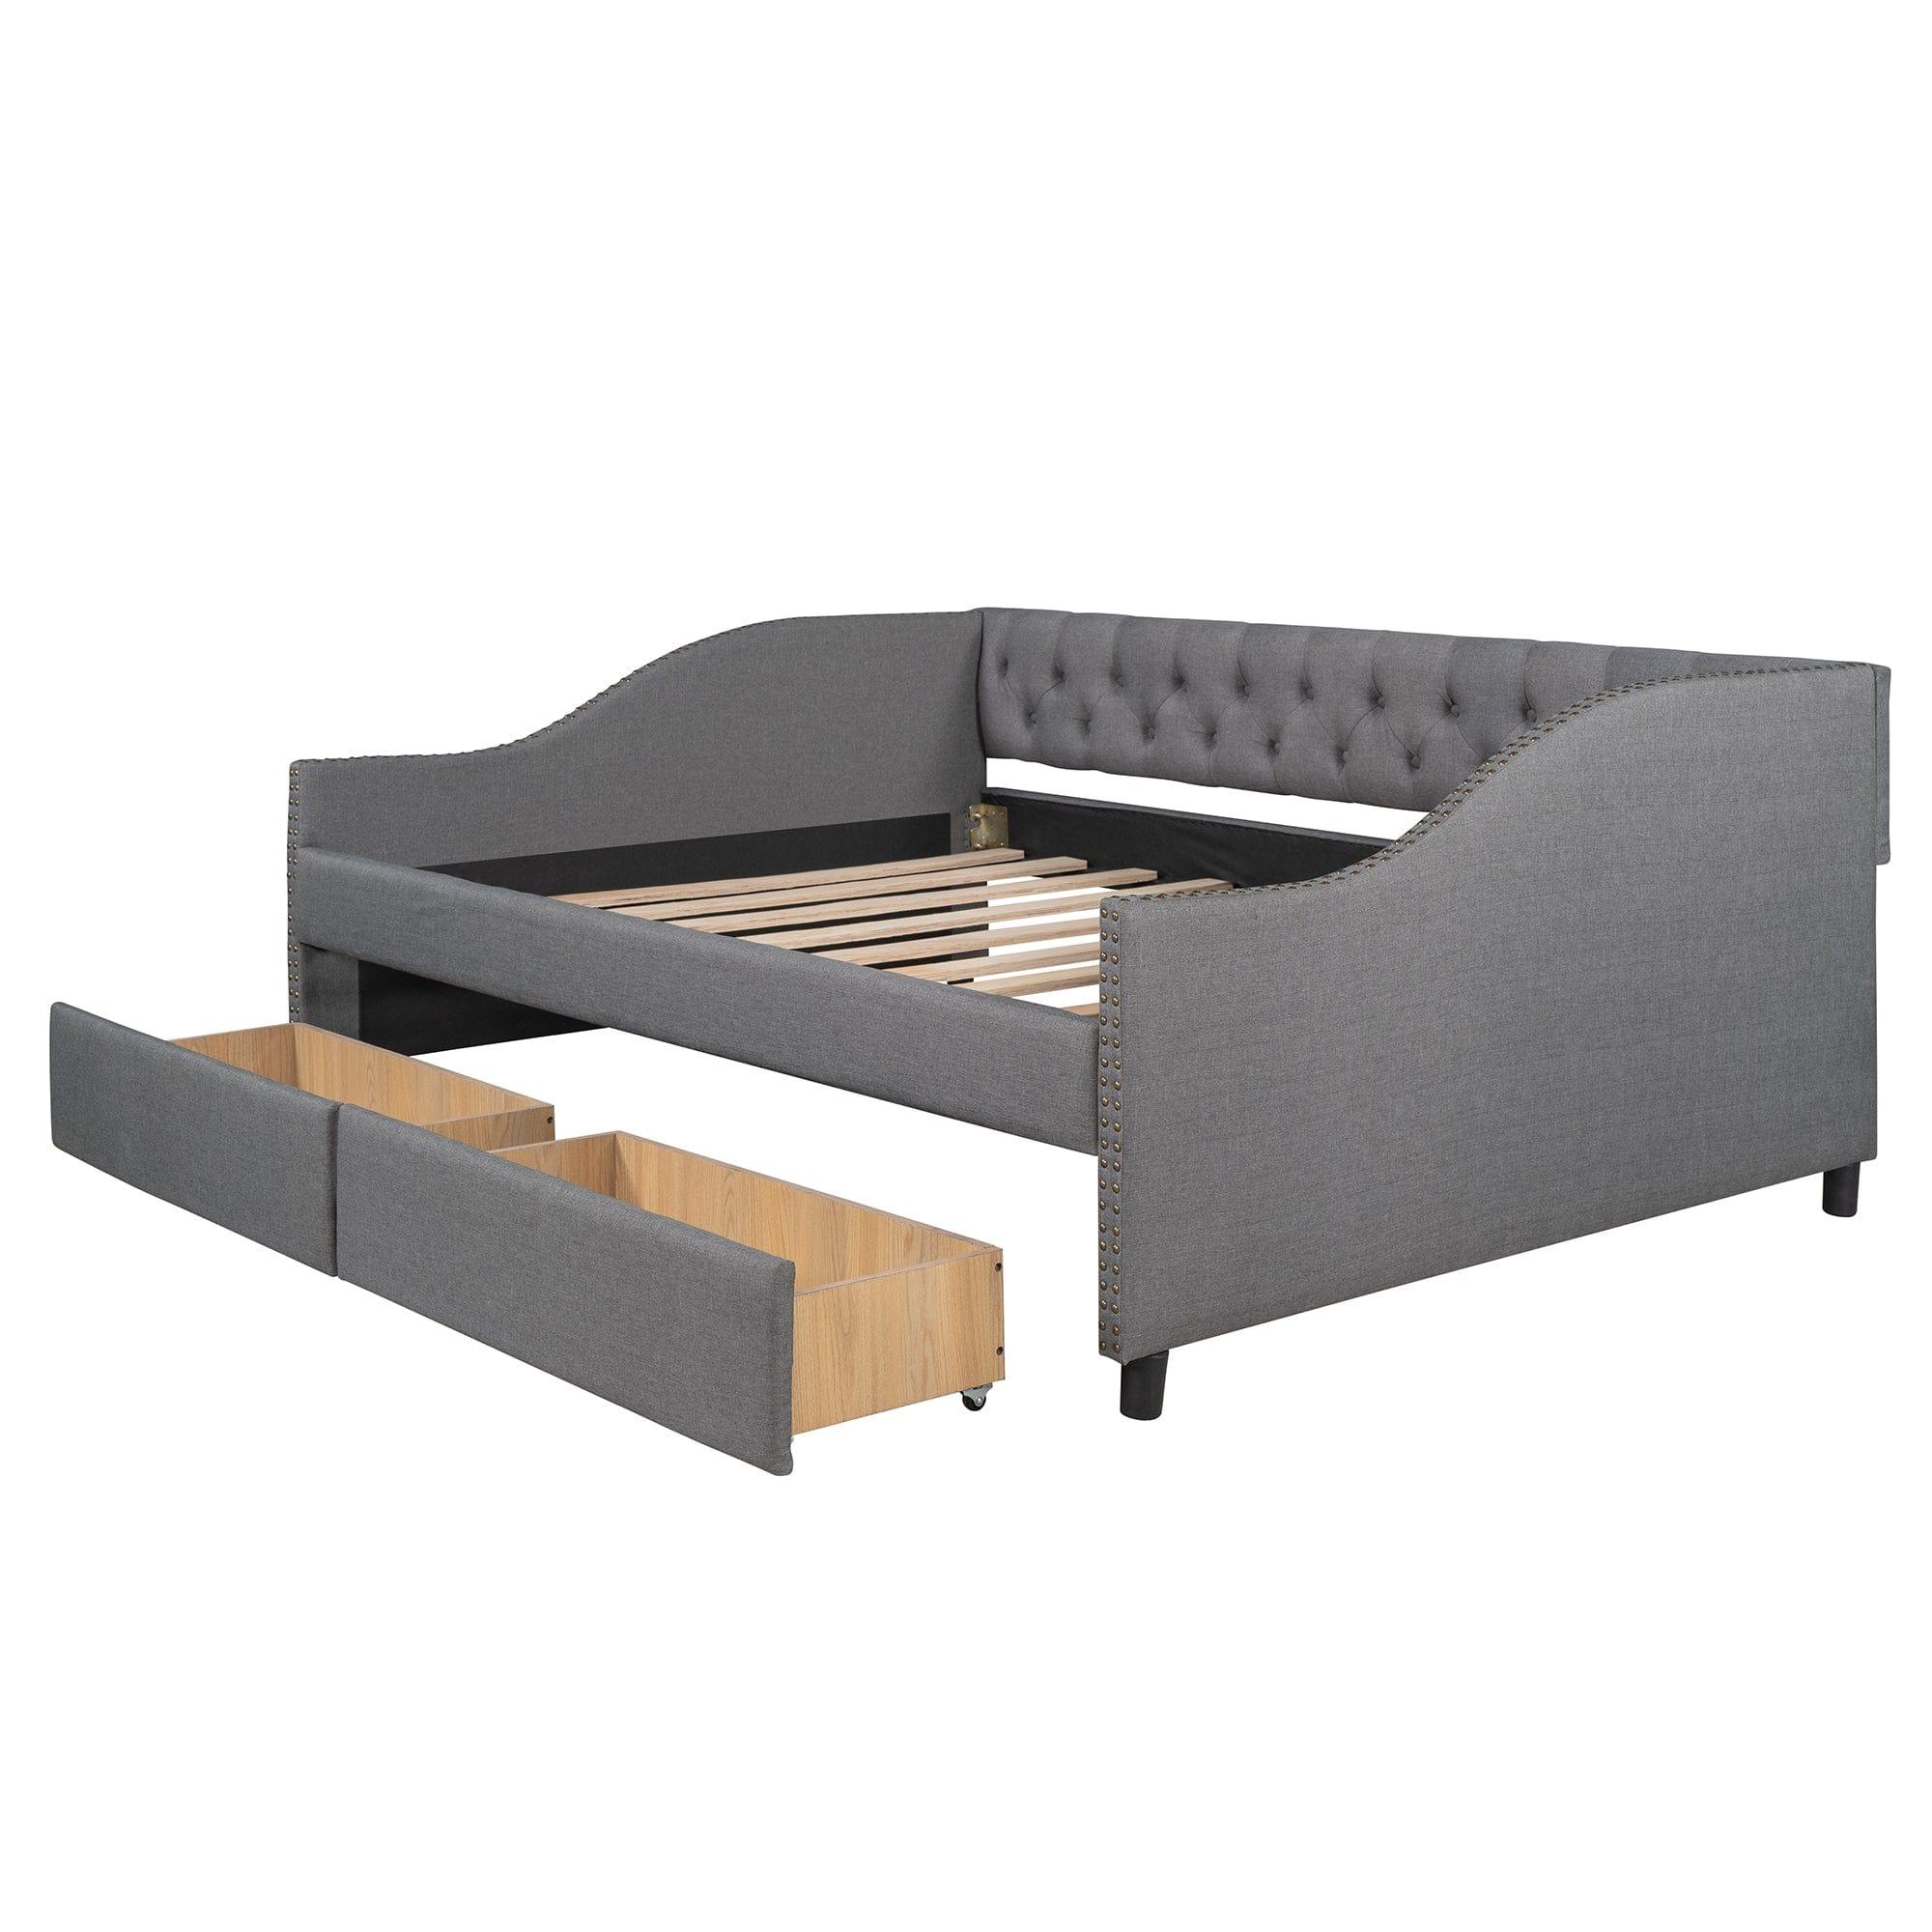 Shop Upholstered daybed with Two Drawers, Wood Slat Support, Gray, Full Size(OLD SKU :LP001111AAE) Mademoiselle Home Decor